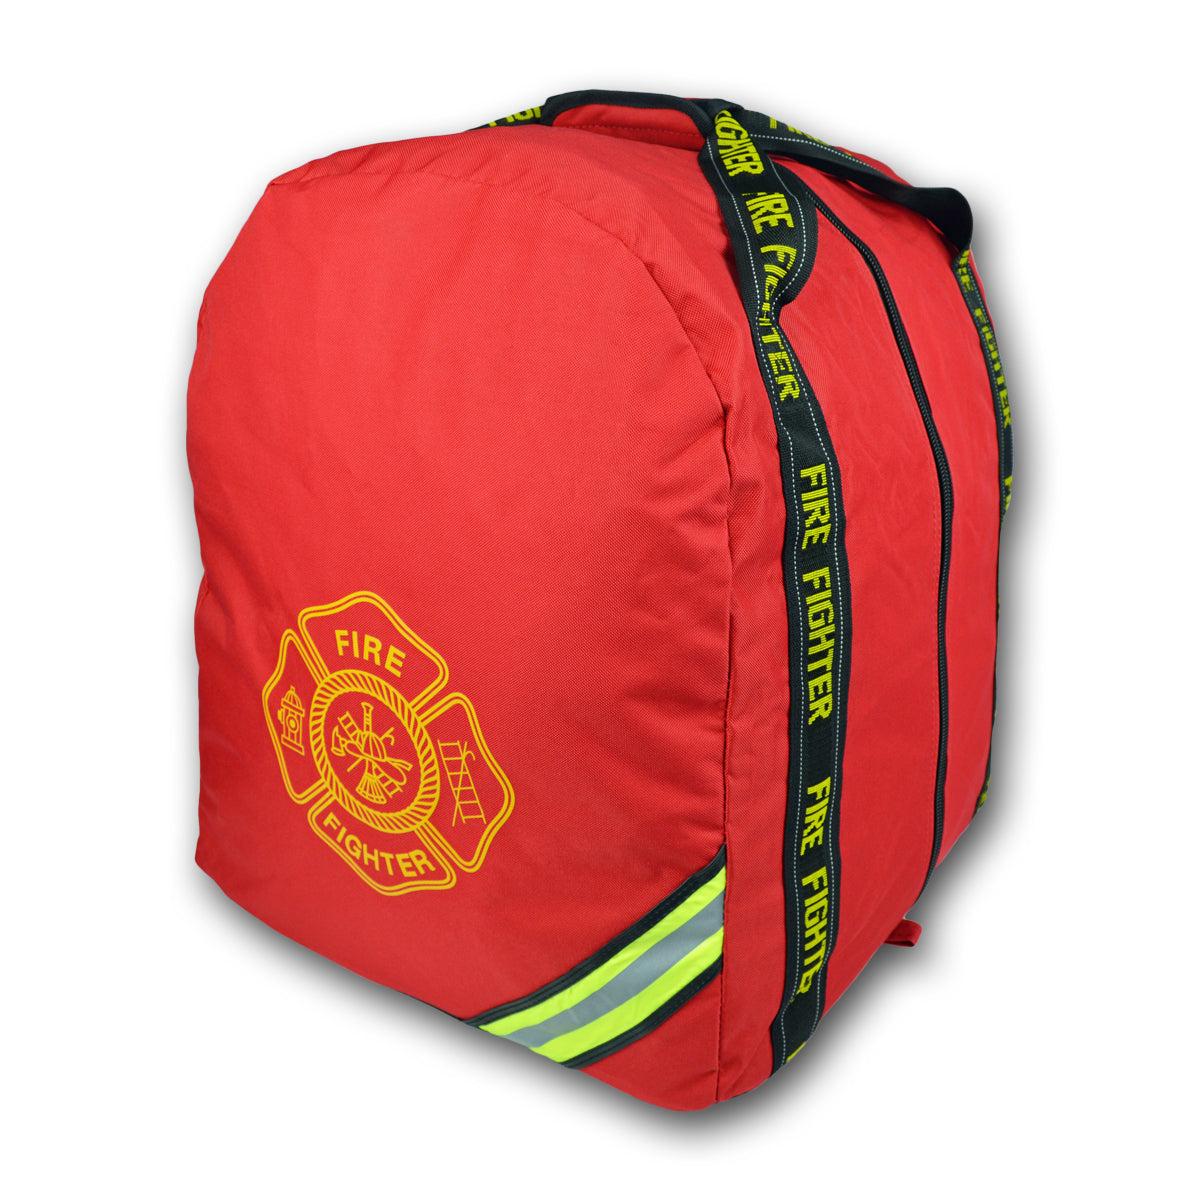 Lightning X Compact Boot Style Firefighter Turnout Gear Bag (LXFB70) | The Fire Center | Fuego Fire Center | Store | FIREFIGHTER GEAR | FREE SHIPPING | Sometimes simplicity is the best solution. The FB70 is a workhorse turnout bag without all the unnecessary bells and whistles. Simply put – it gets the job done. The FB70 is a center “clam shell” opening step-in style gear bag that stores turnout gear and boots in a ready-to-go state. 